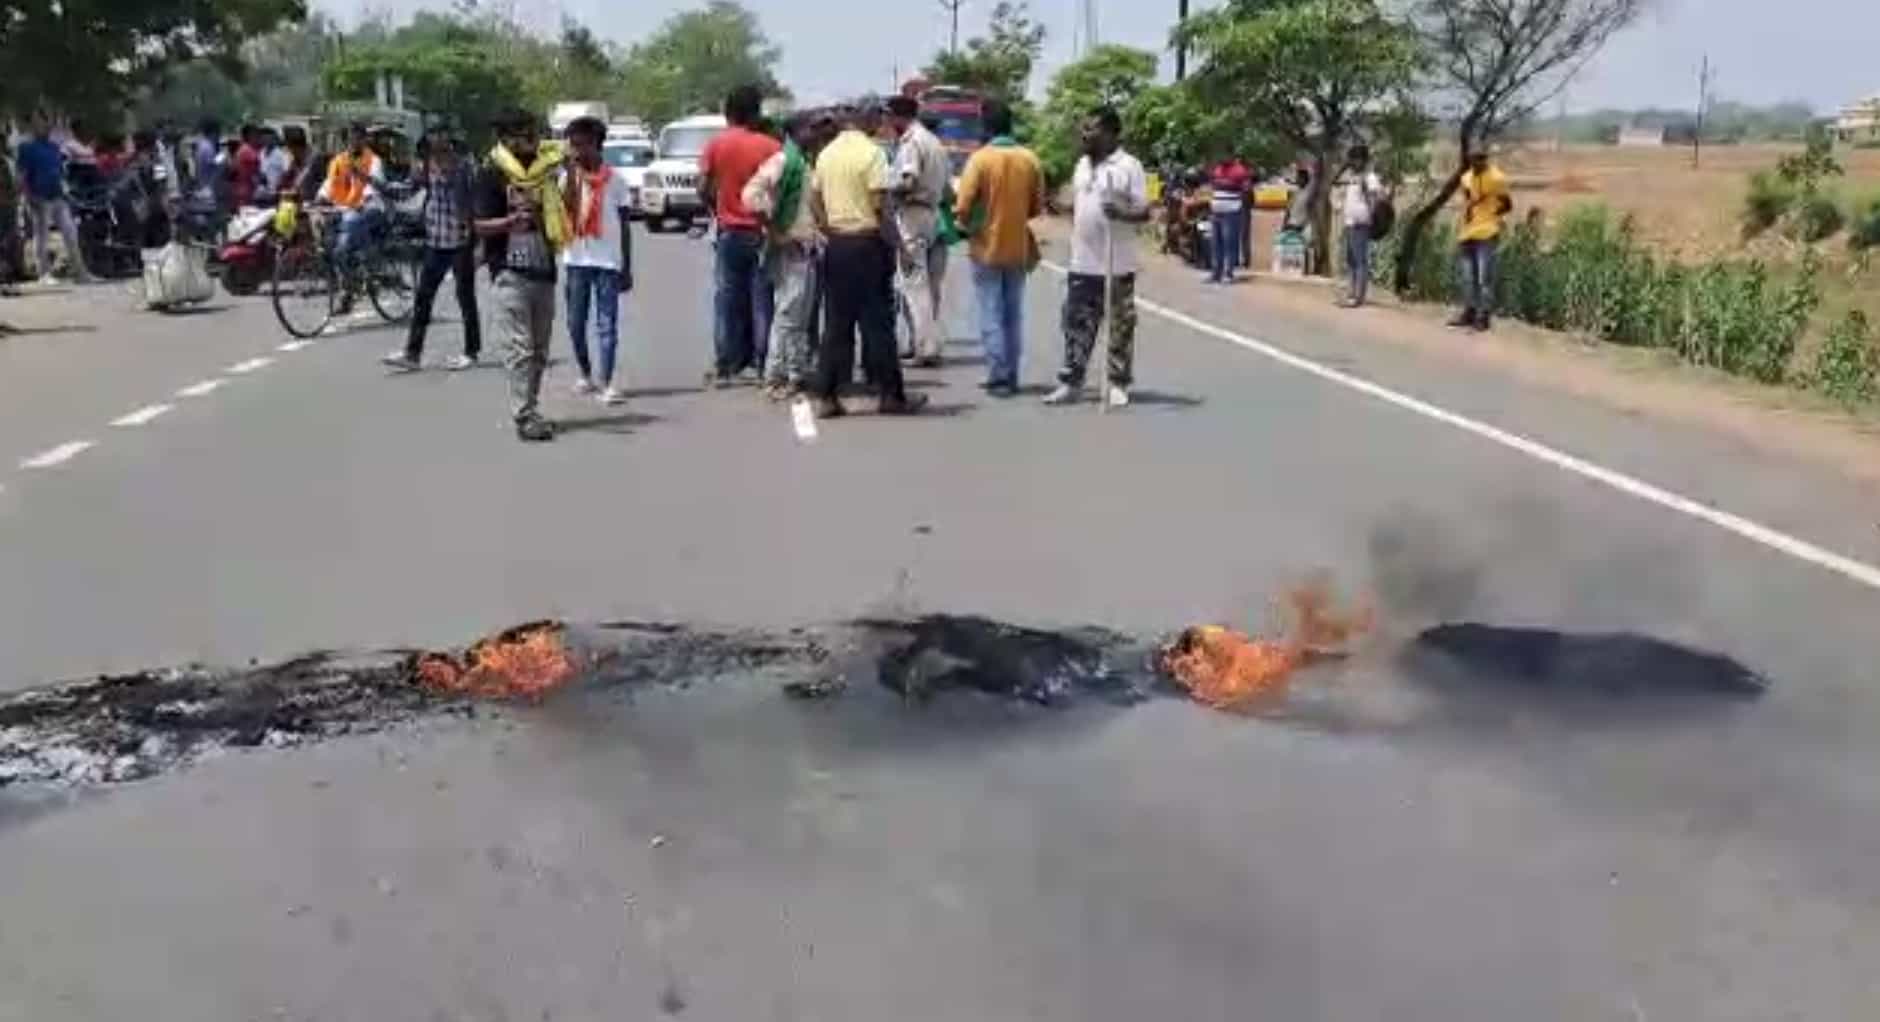 Protestors in Jharkhand initiate a 48-hour bandh opposing the 60:40 Employment policy, leading to mixed reactions across rural and urban areas.